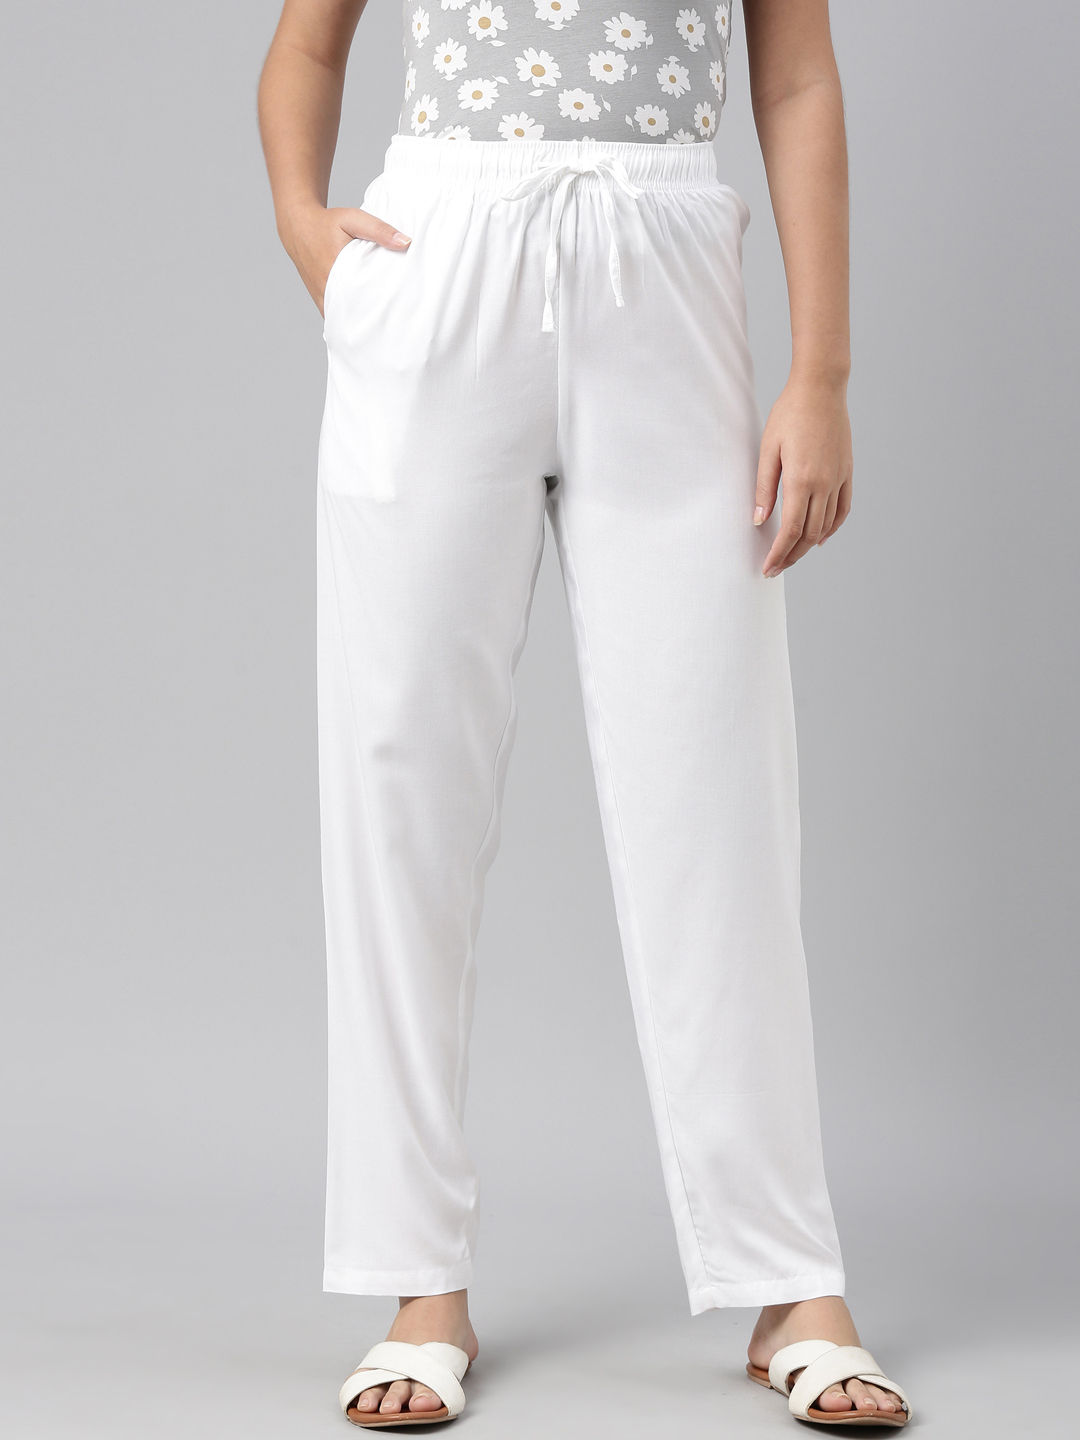 Buy Hooever Womens Casual High Waisted Wide Leg Pants Button Up Straight  Leg Trousers, White, X-Small at Amazon.in